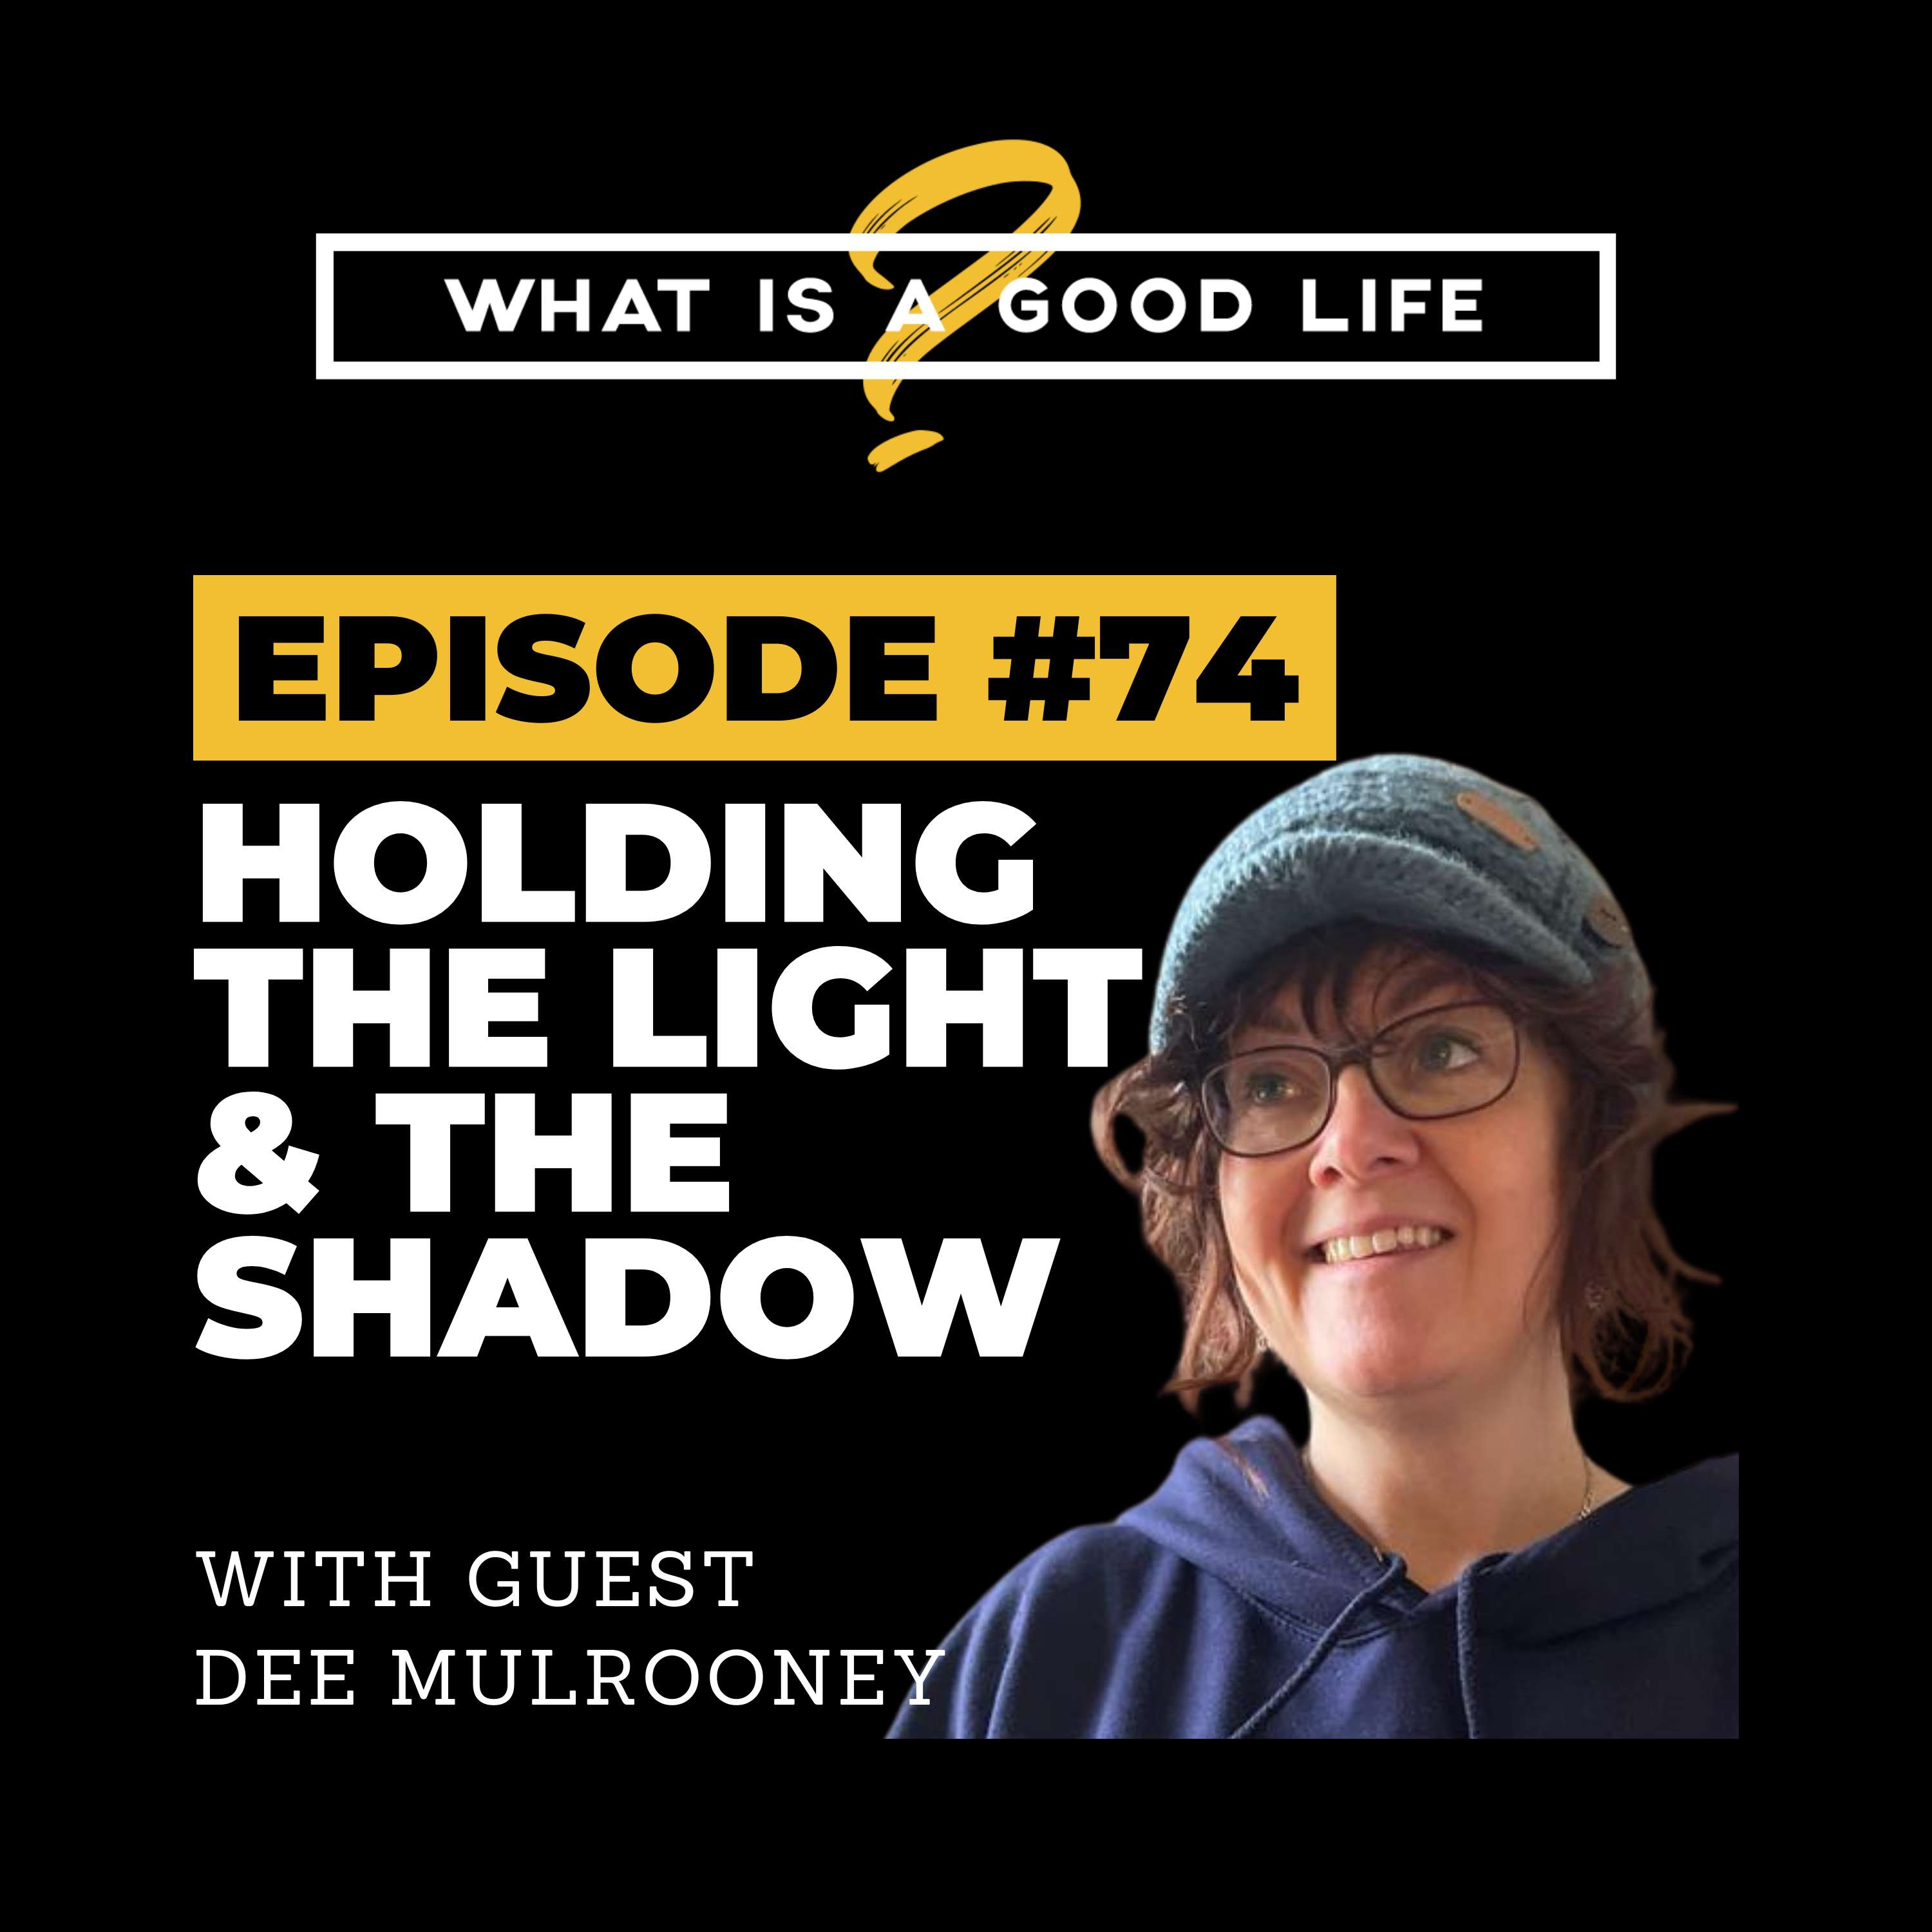 What is a Good Life? #74 - Holding The Light & The Shadow with Dee Mulrooney